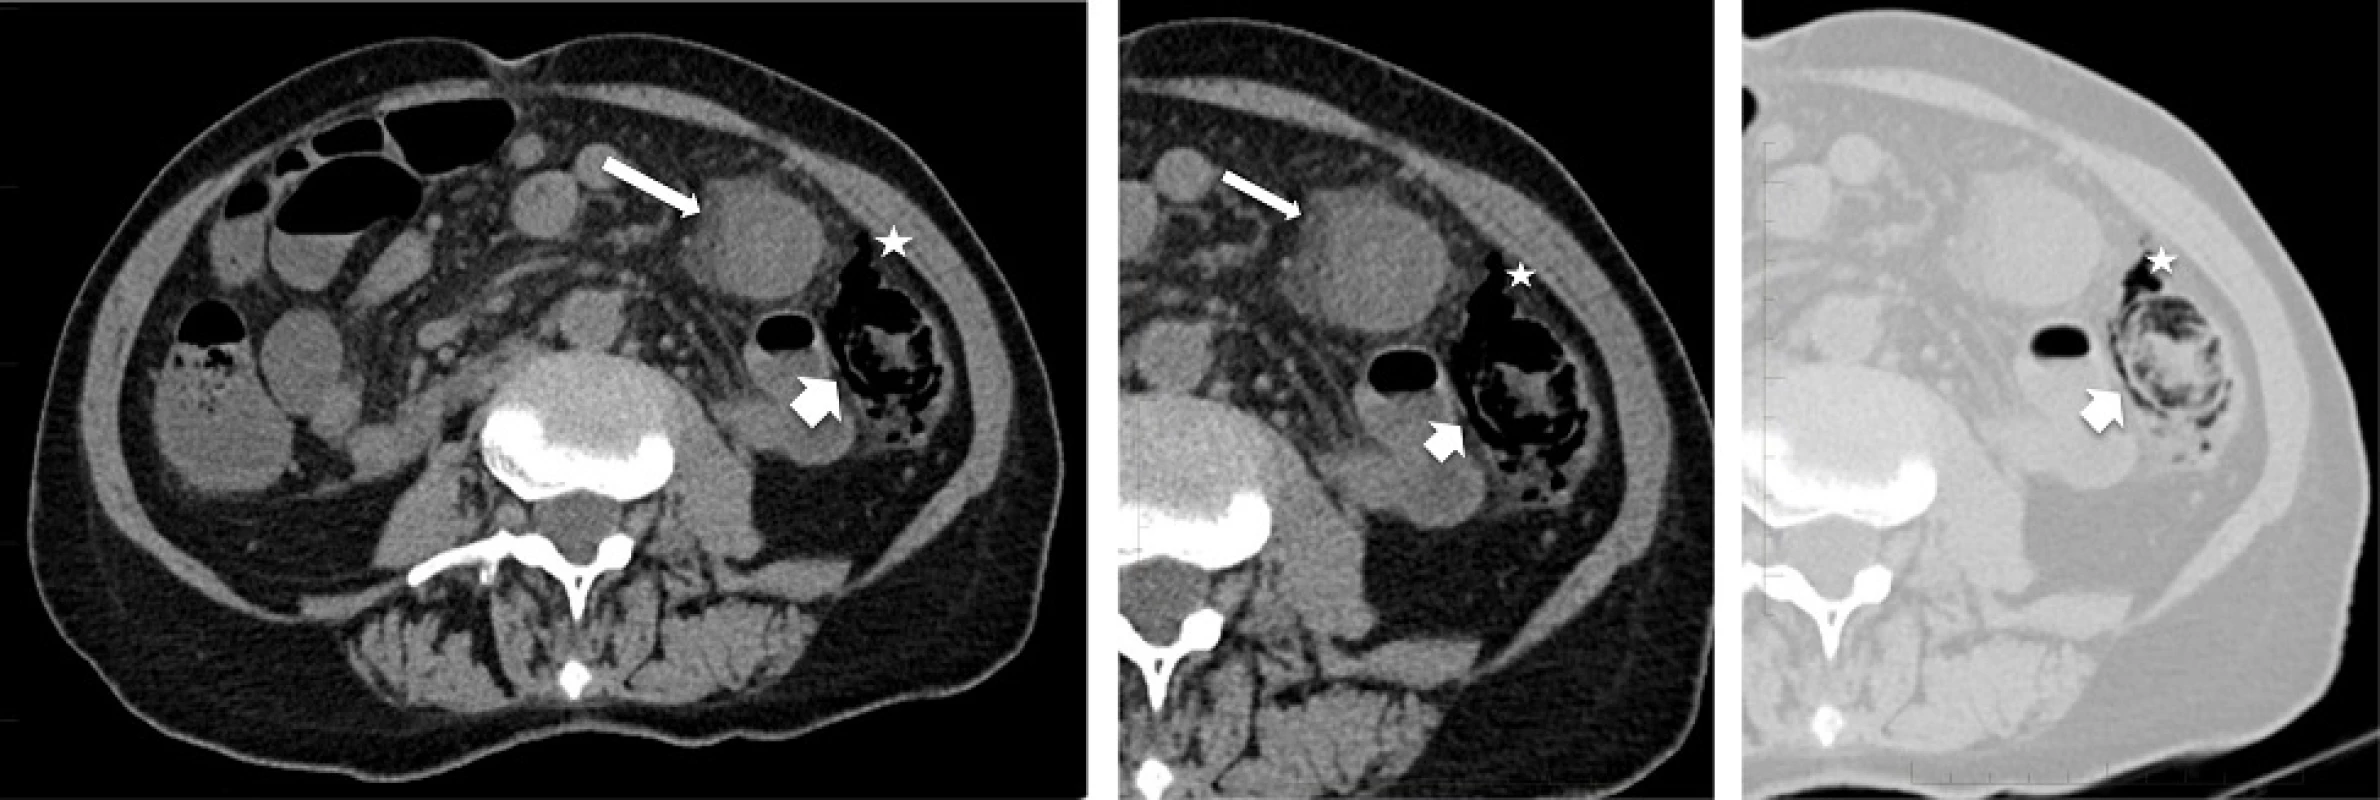 Radiologic images: a Axial view of unenhanced abdominal CT showing thickened bowel wall with fat stranding (thin arrow) involving the colonic splenic flexure. b and c Zoomed axial view of the left abdomen in soft tissue (b) and pulmonary (c) windows showing pneumatosis (thick arrow) and free air in the surrounding mesocolon (star)